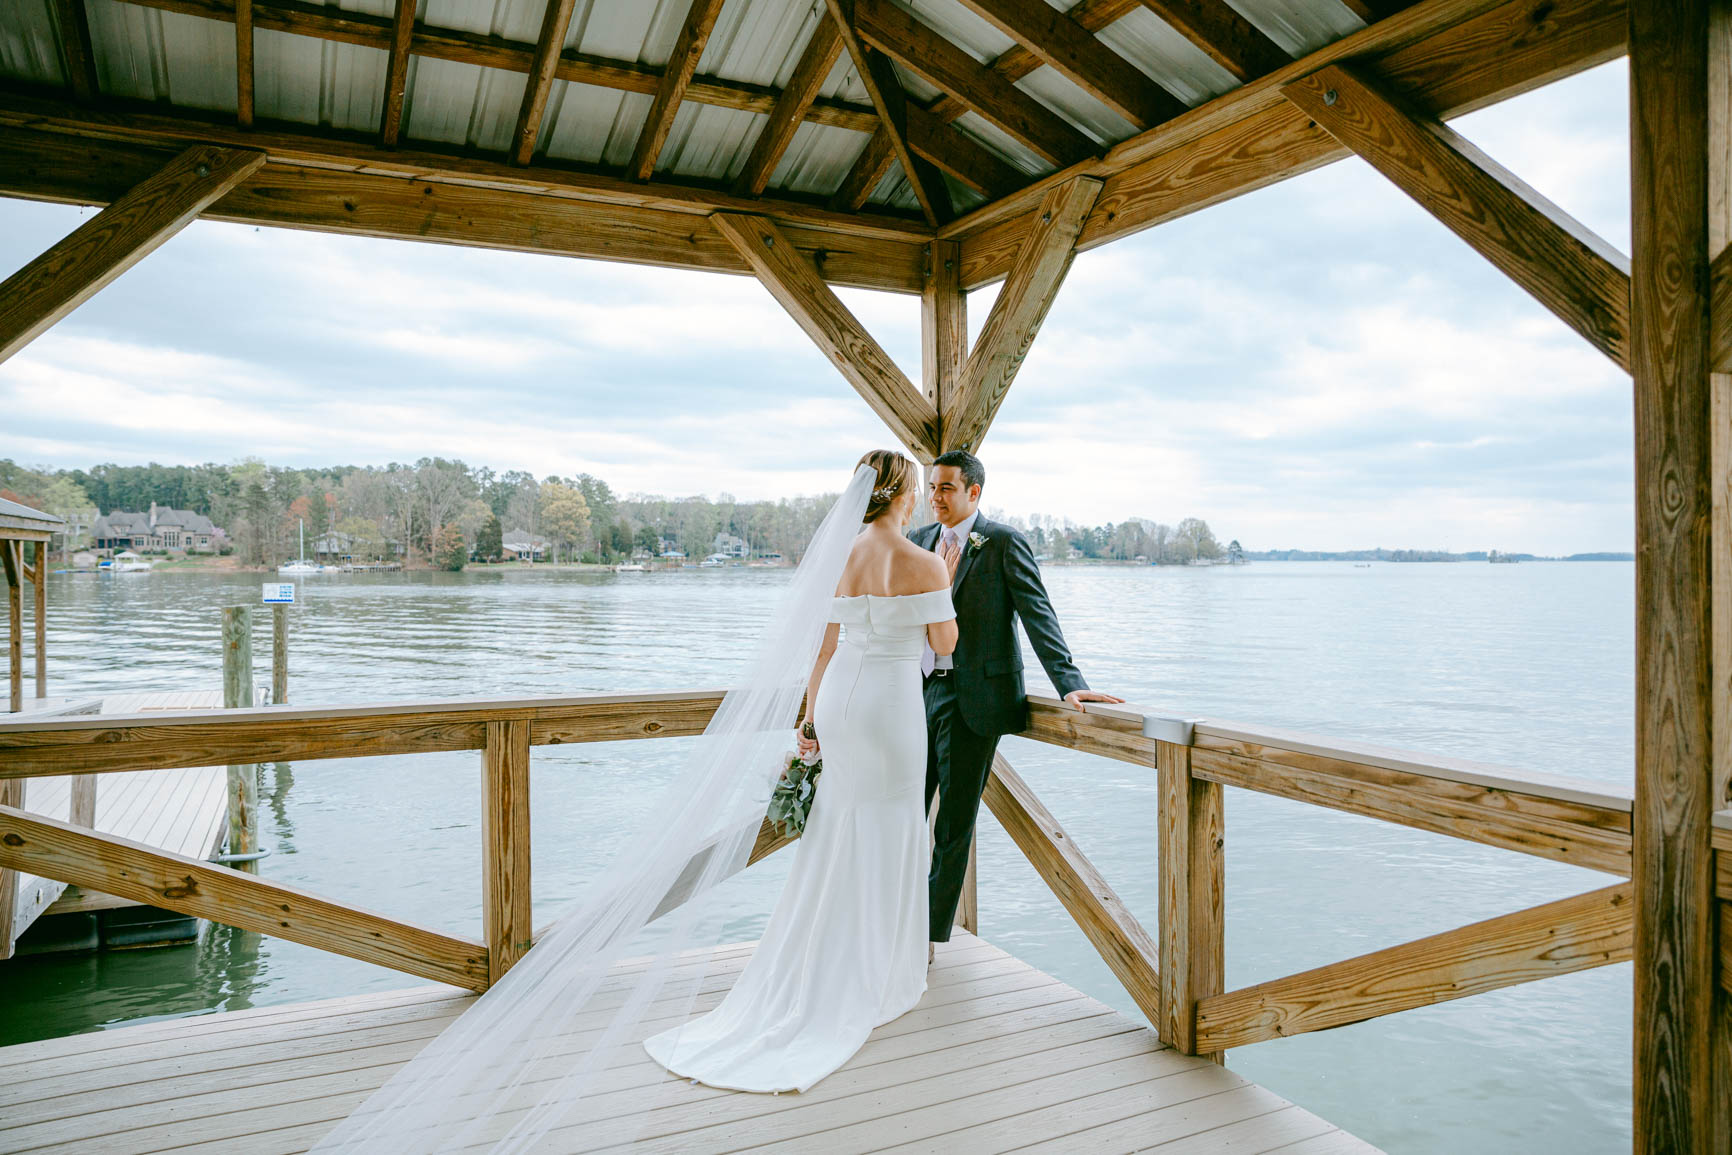 lake dock elopement portraits session shot by Nhieu Tang Photography | nhieutang.com